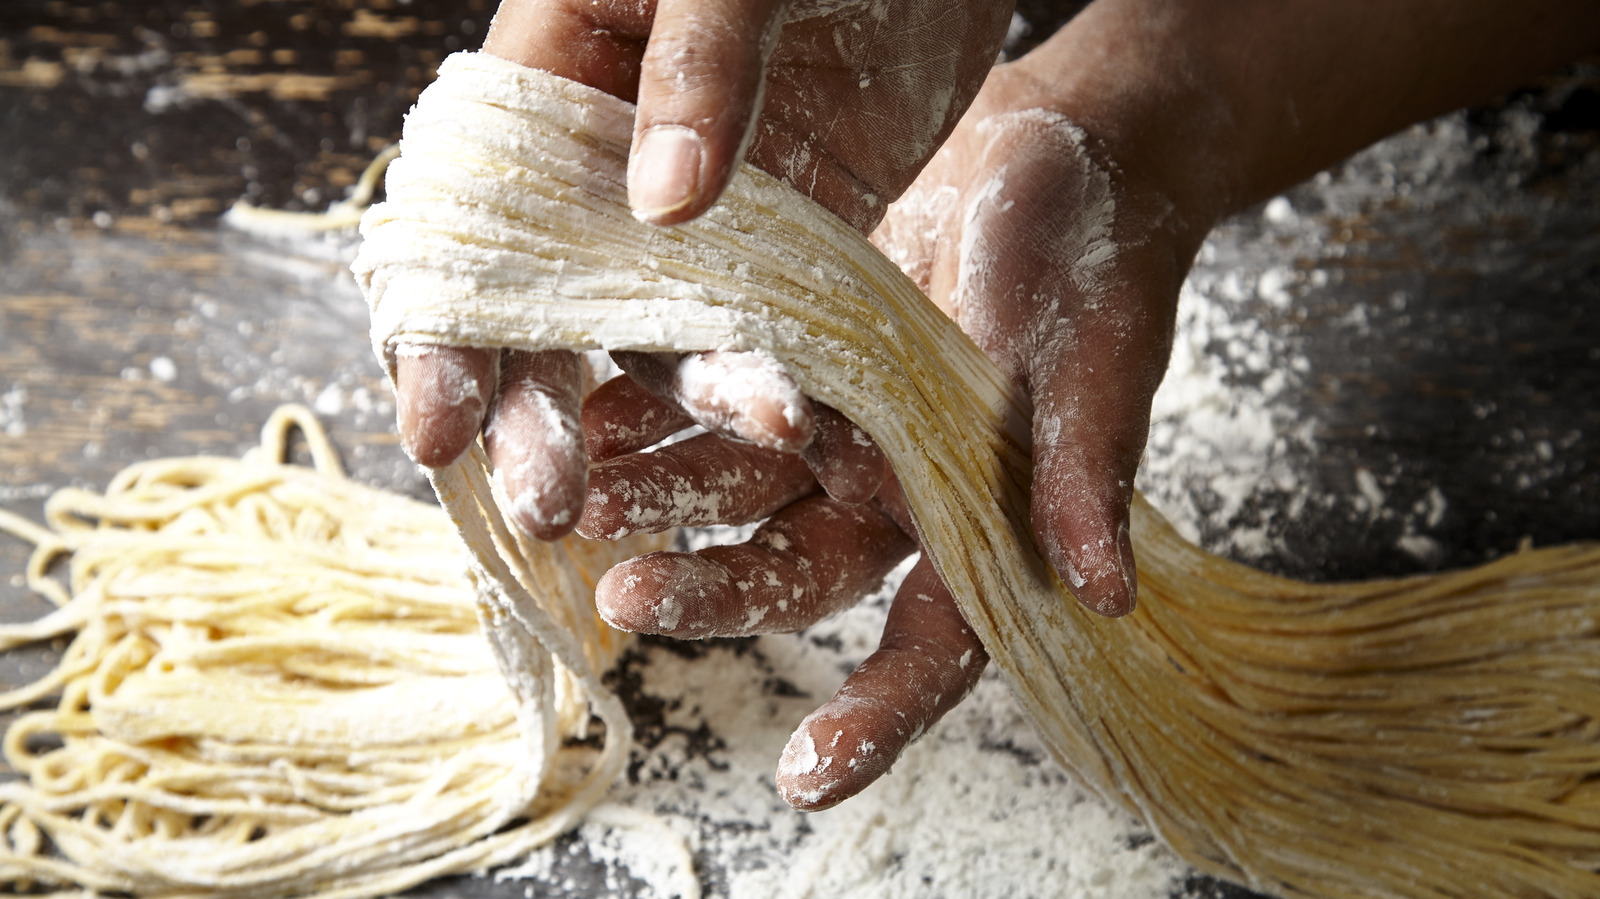 The Rarest Pasta In The World Requires A 20-Mile Hike To Eat It